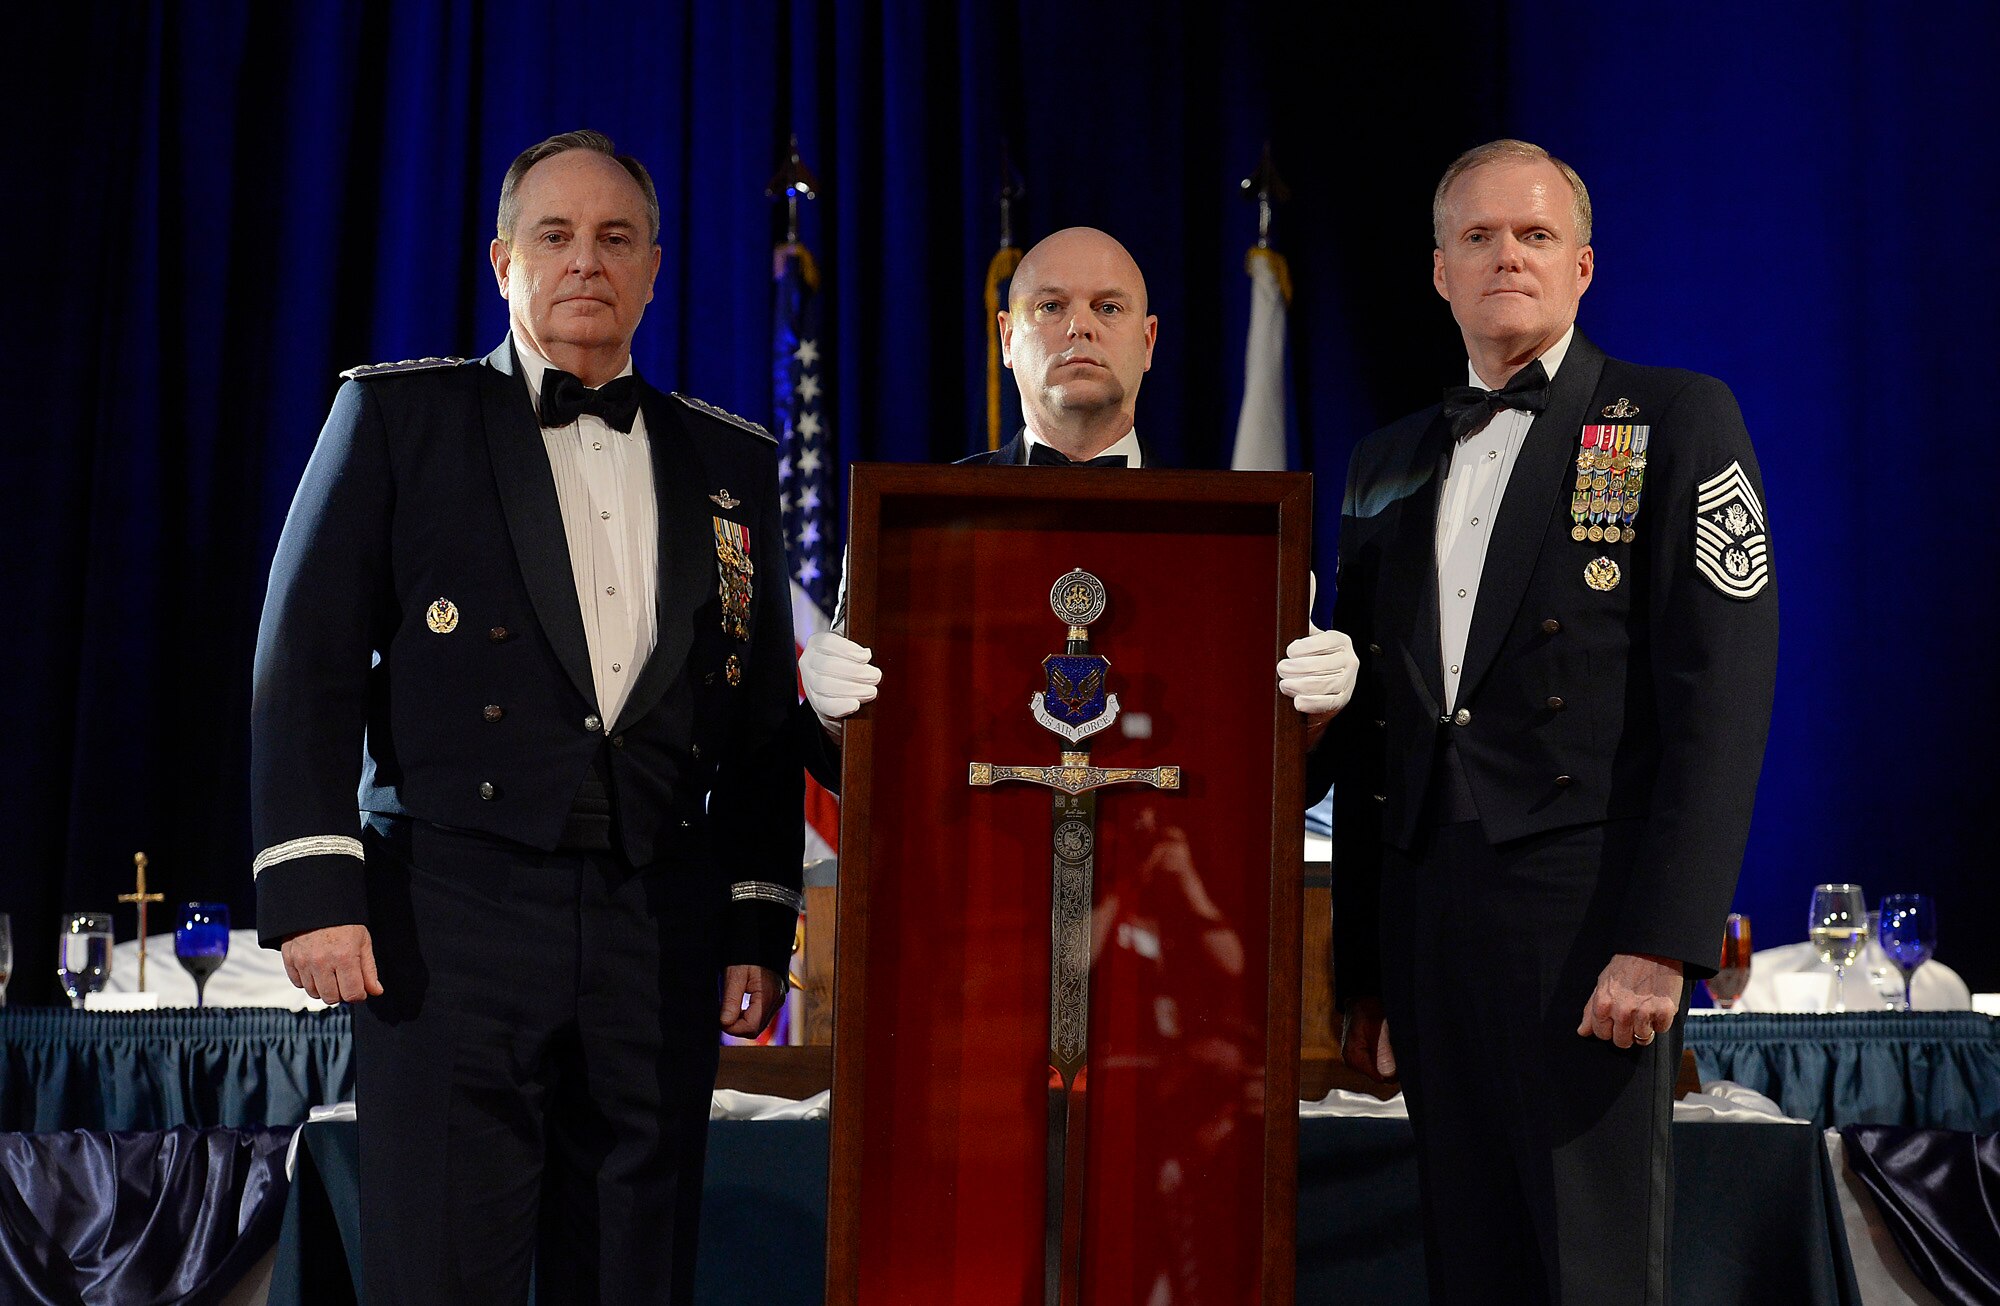 Air Force Chief of Staff Gen. Mark A. Welsh III thanks Chief Master Sgt. of the Air Force James A. Cody and members of the mess during the Order of the Sword dining-in, April 22, 2016, in Montgomery, Ala. The Order of the Sword is bestowed to those who have made significant contributions to the Air Force enlisted corps, and during his speech Welsh shared experiences in his career that shaped his opinion of the enlisted corps. (U.S. Air Force photo/Scott M. Ash)